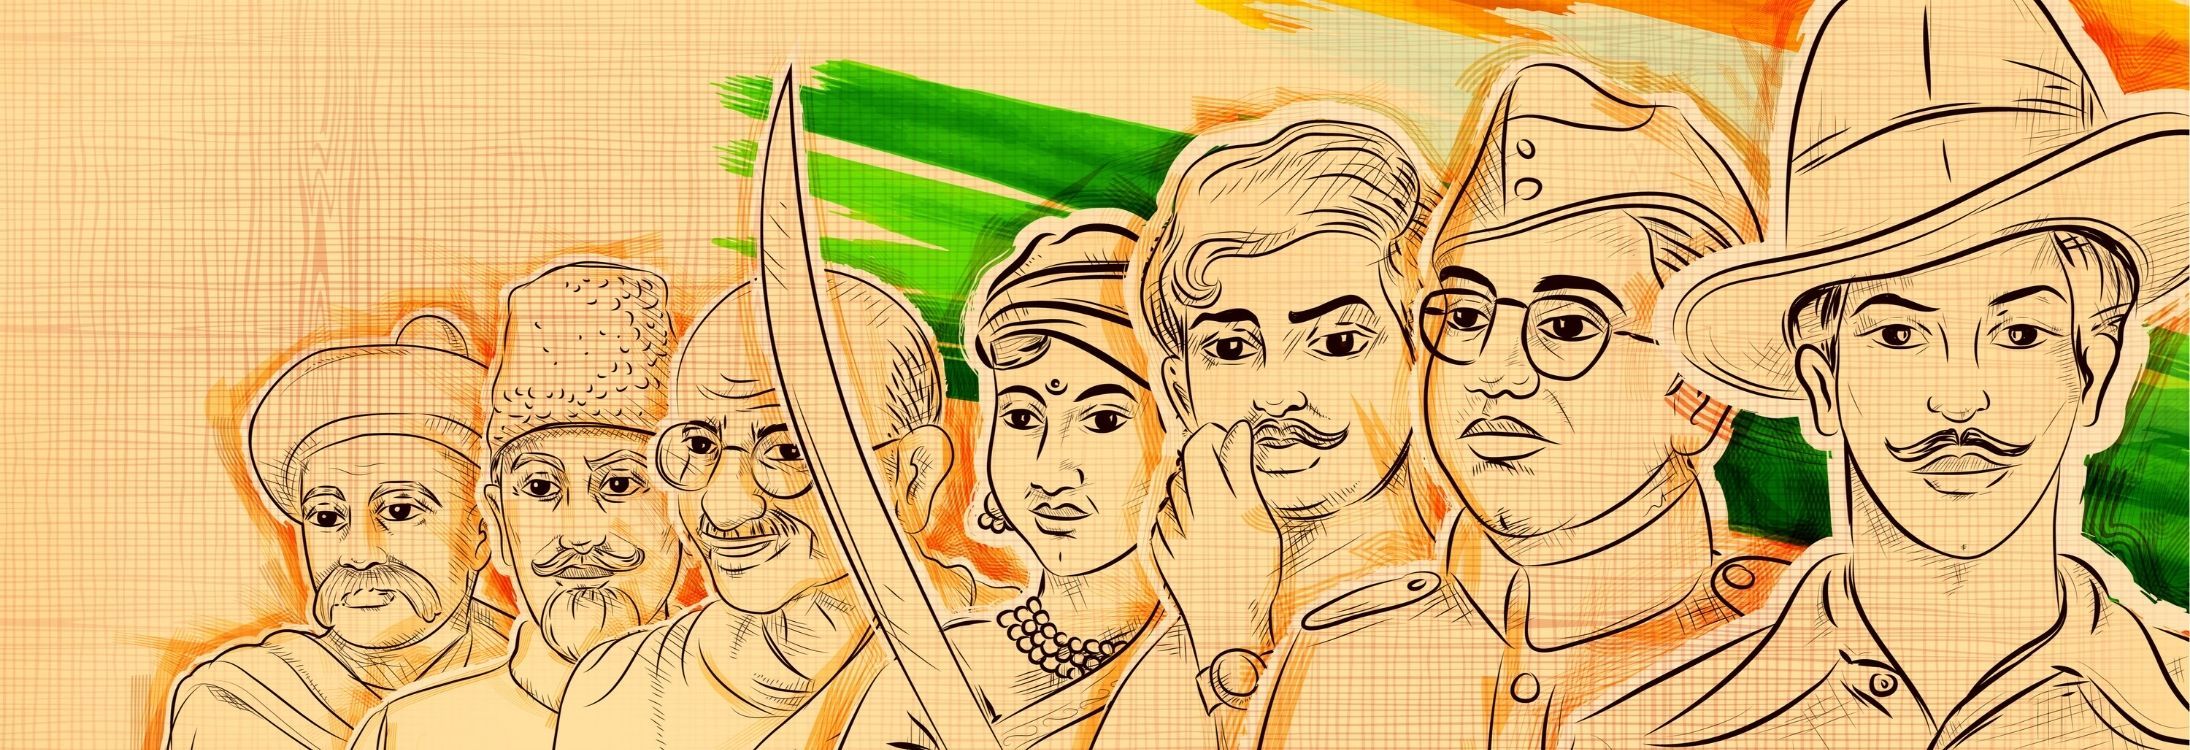 8 Gandhi ideas | gandhi, freedom fighters of india, independence day drawing-hancorp34.com.vn